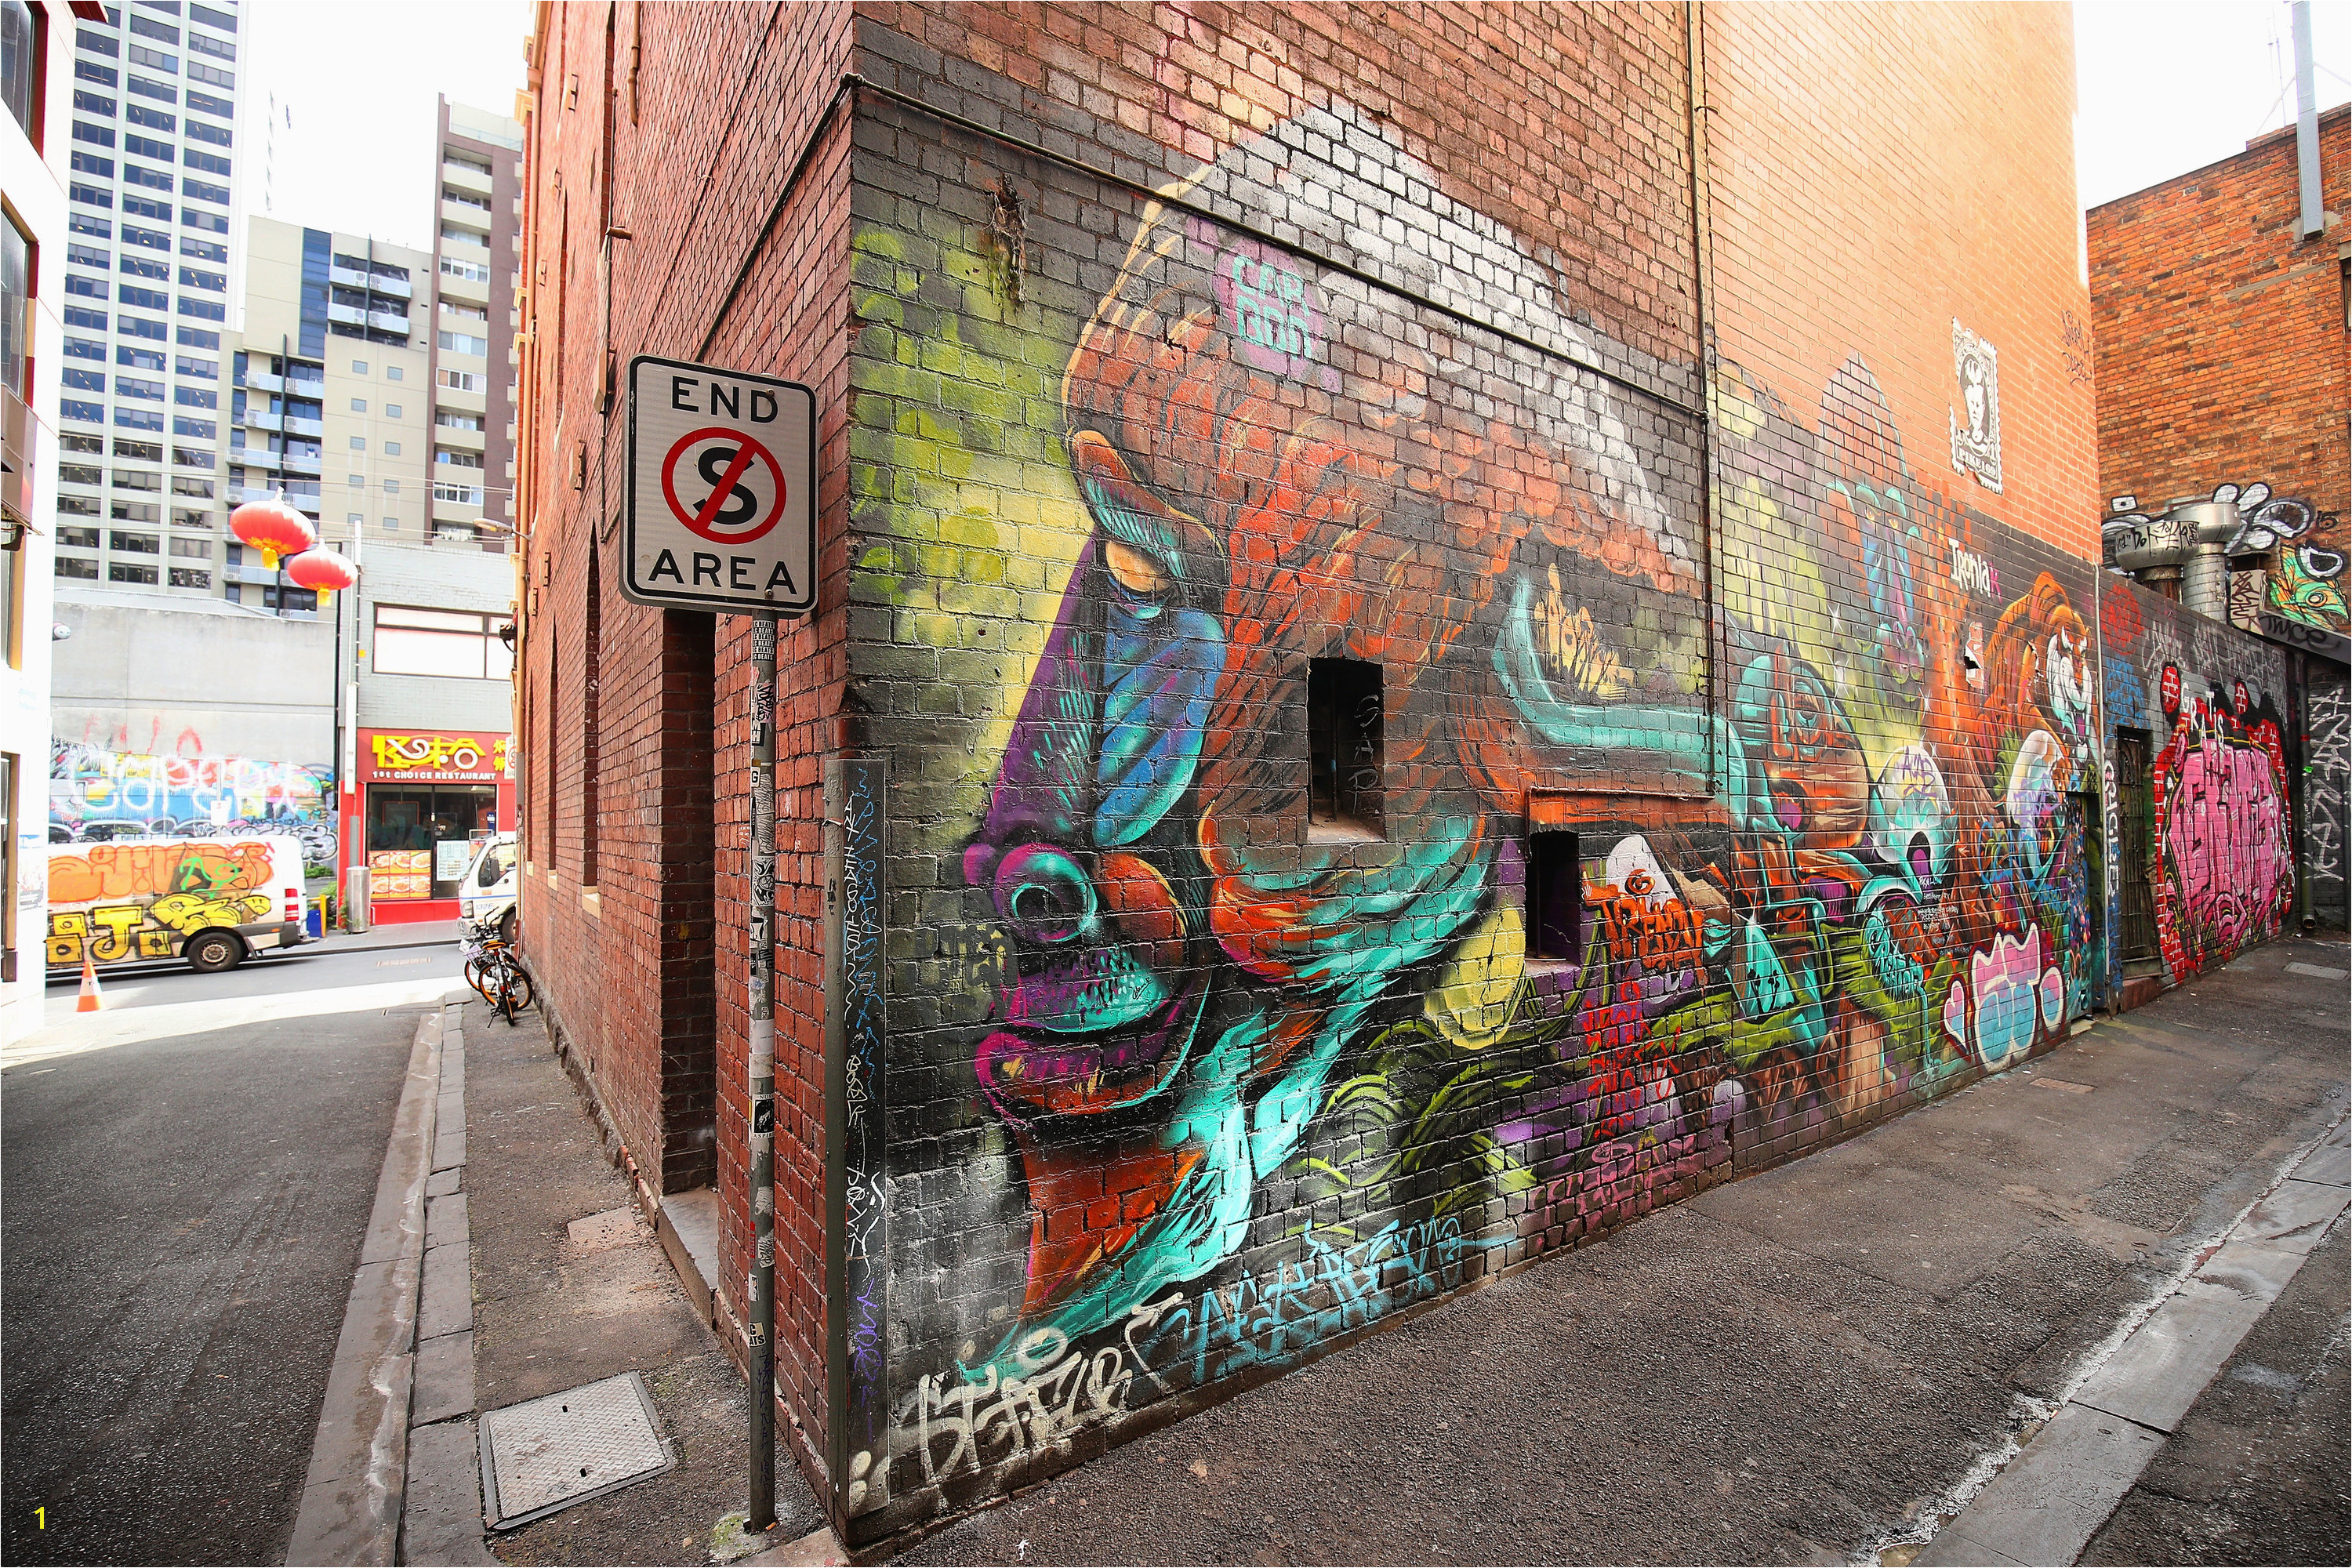 Train Station Wall Mural Best Street Art In Melbourne where to Find the Best Murals and